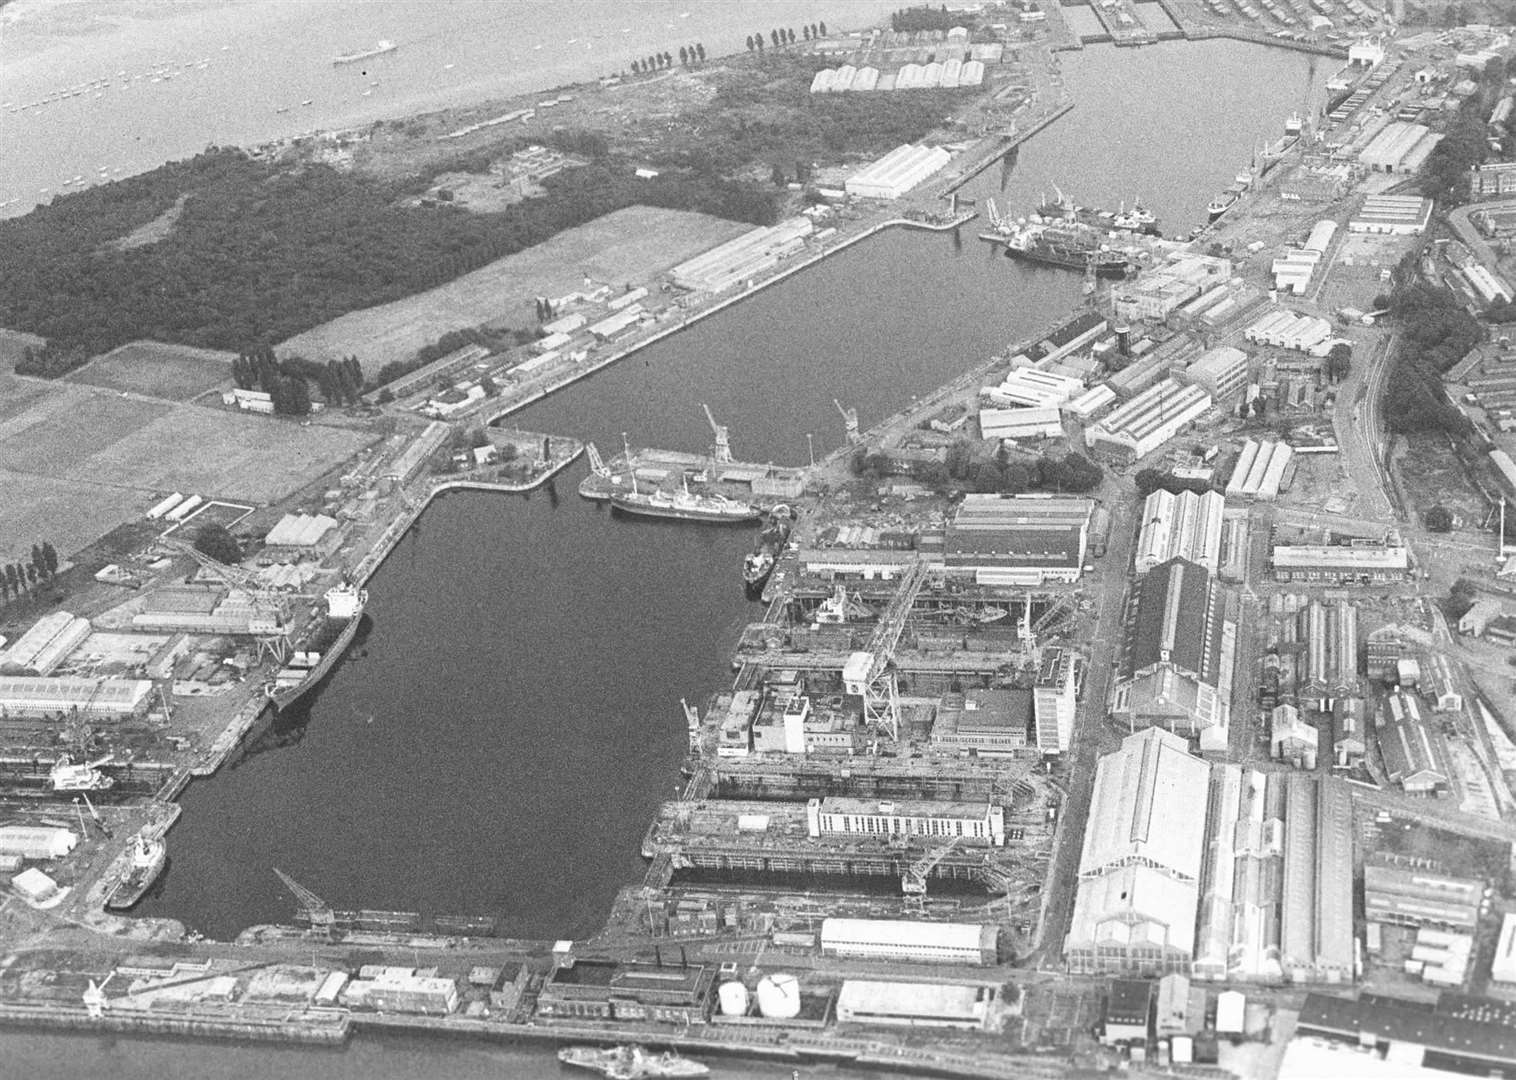 The impact of the closure of the dockyard had a profound impact on the area